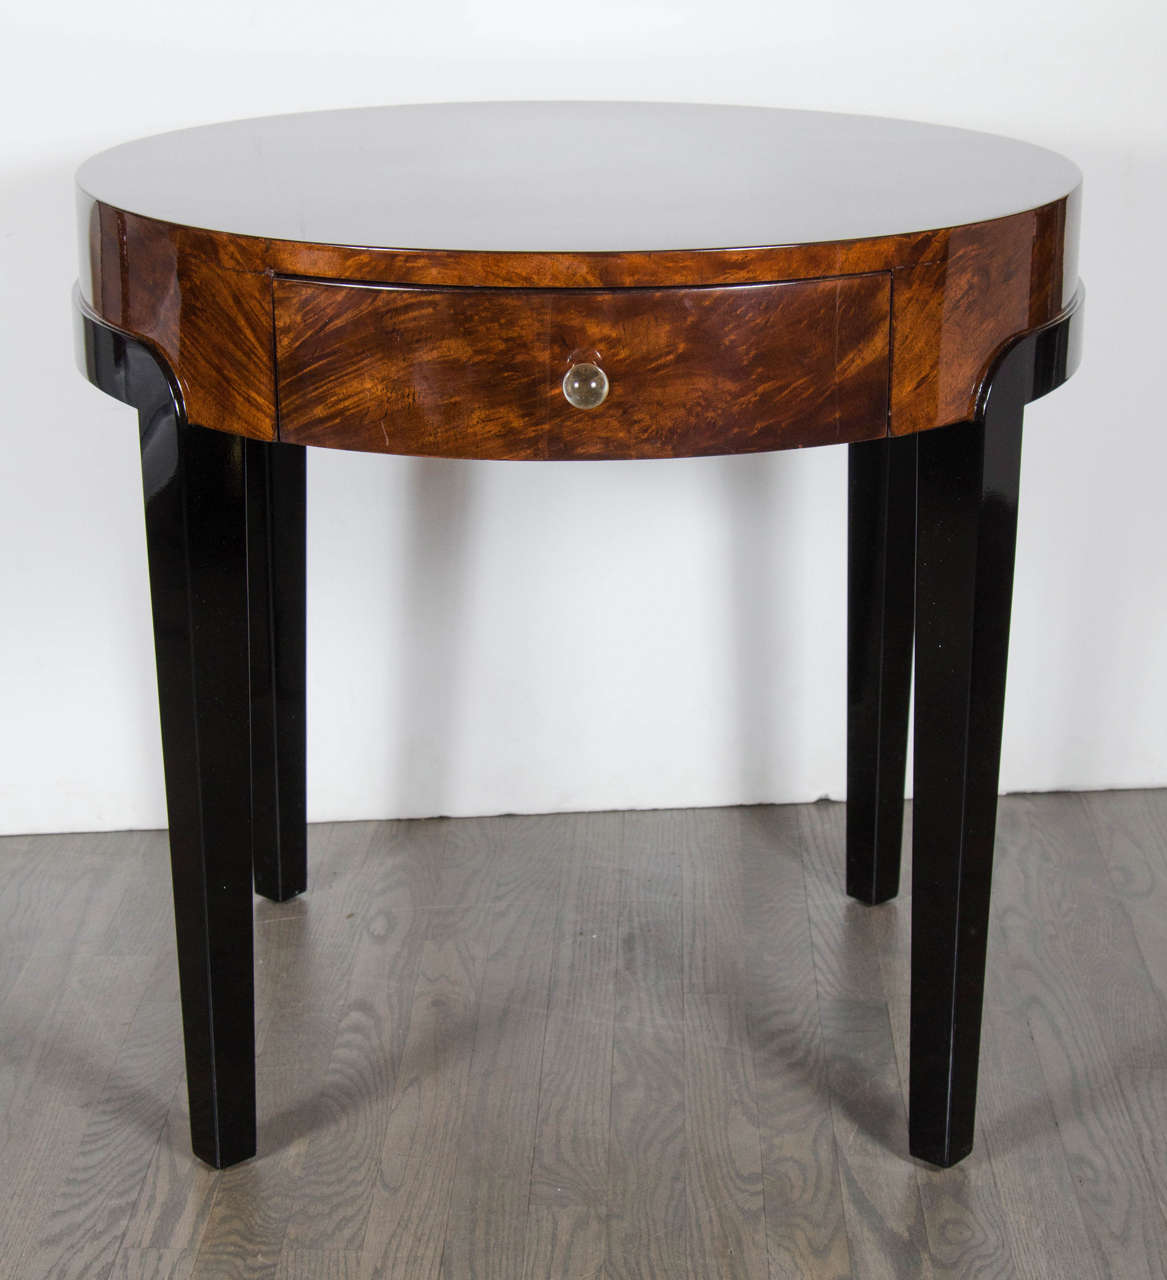 This stunning table features streamlined supports and legs in black lacquer with a book-matched exotic walnut top fitted with two drawers and crystal pulls.This table has been mint restored.